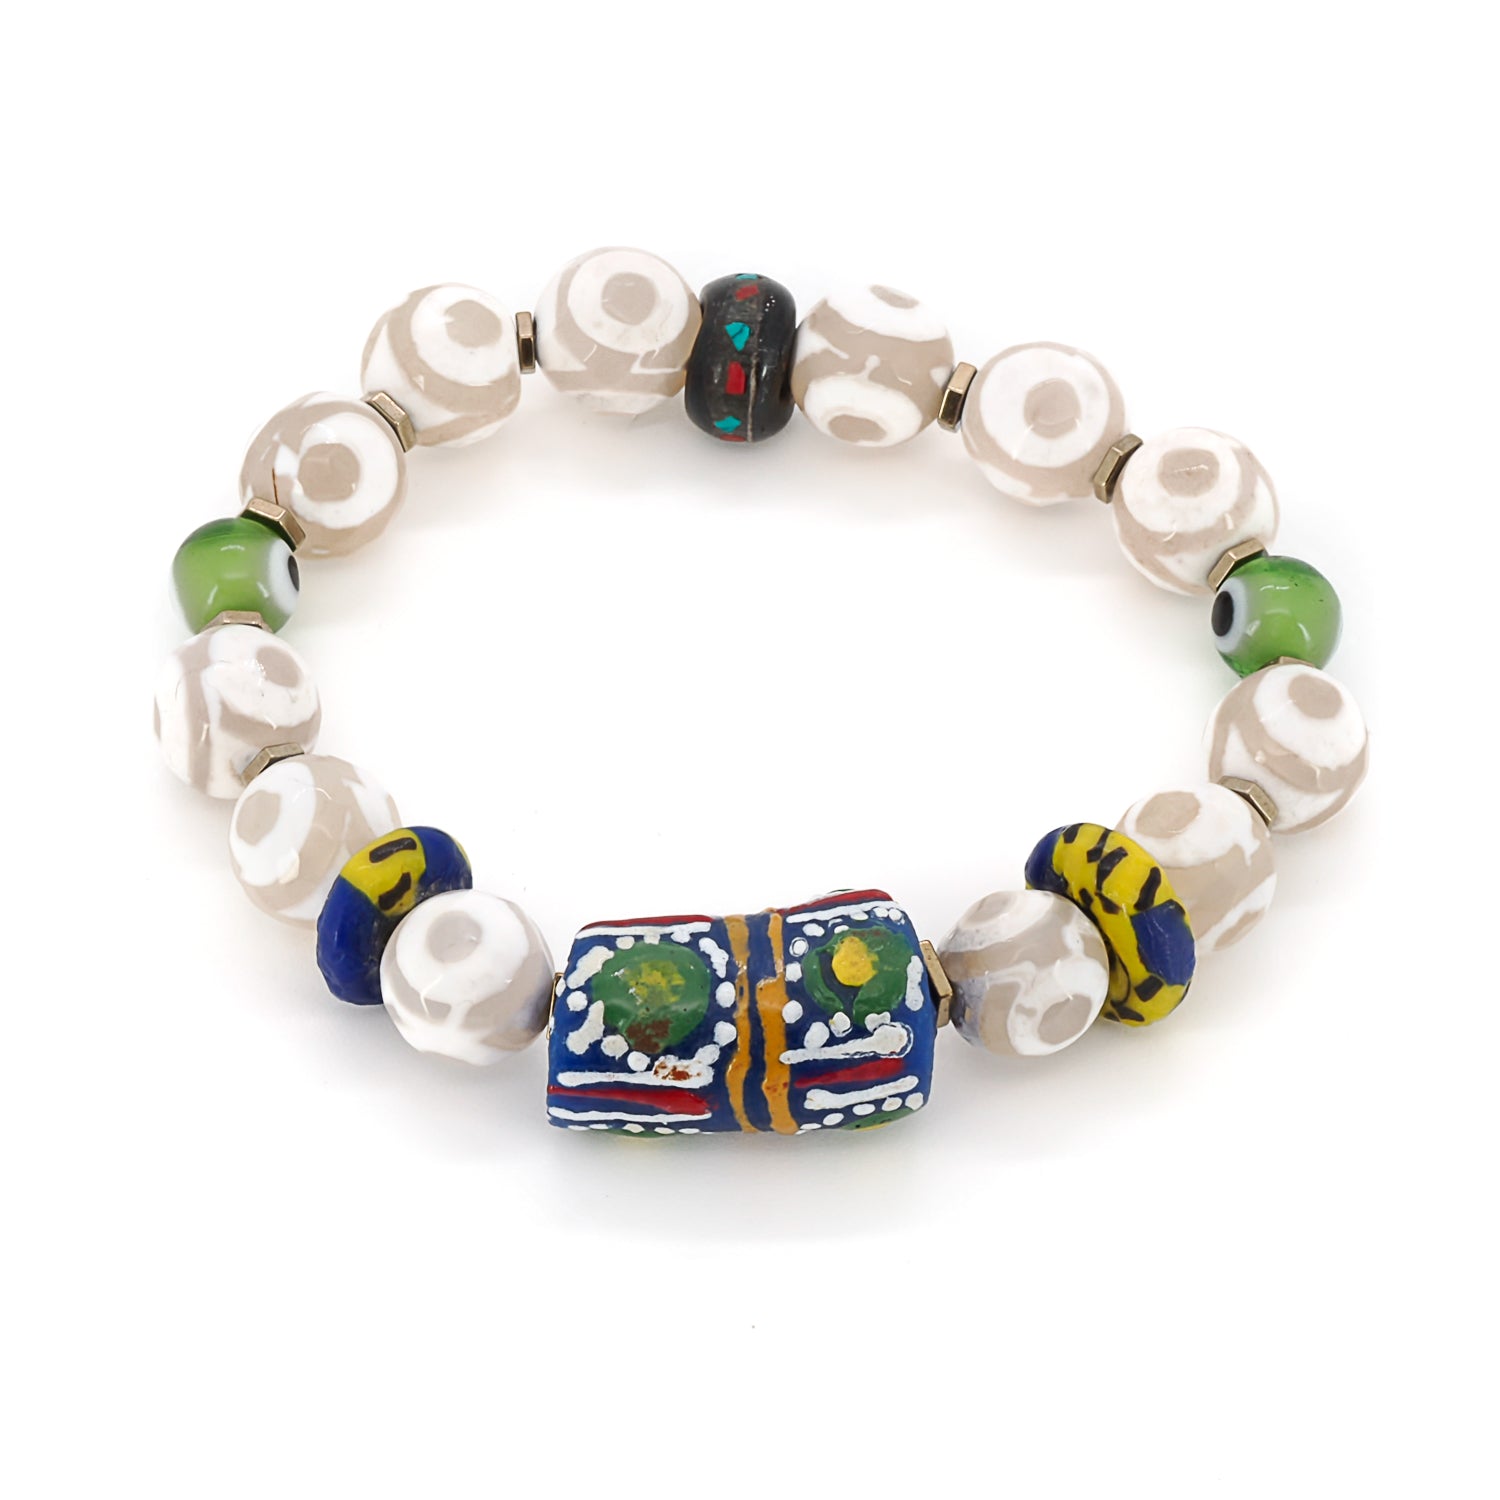 The Eye of Colors Bracelet, featuring white agate stone beads, hand-painted African beads, and green evil eye beads for protection and positive energy.